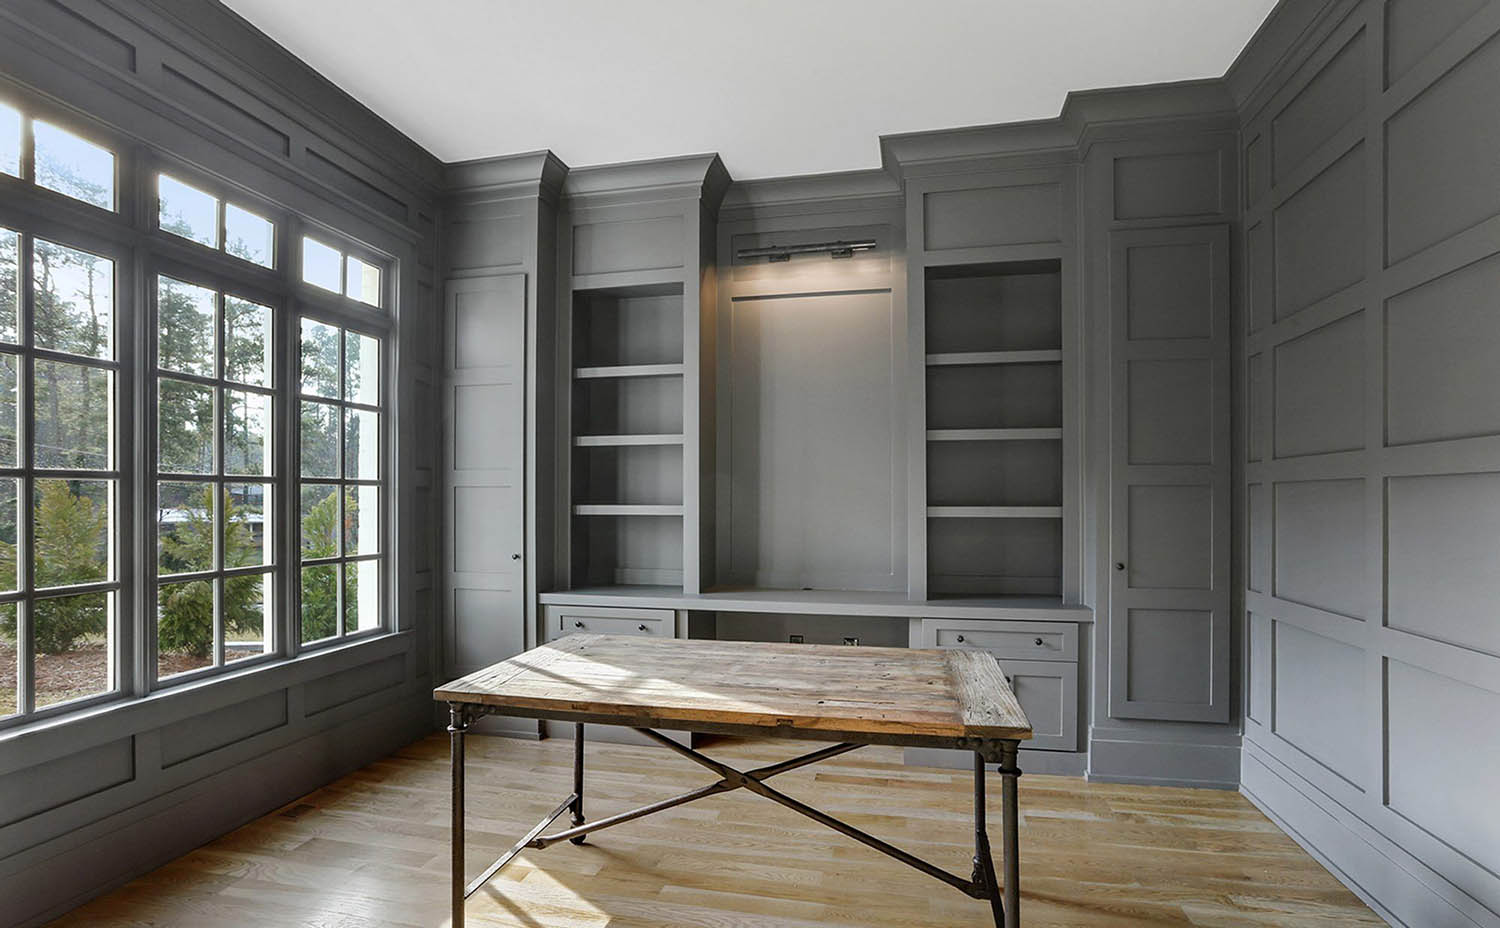 Wood walls painted gray with wall penling and built ins. Square shaker style trim design.